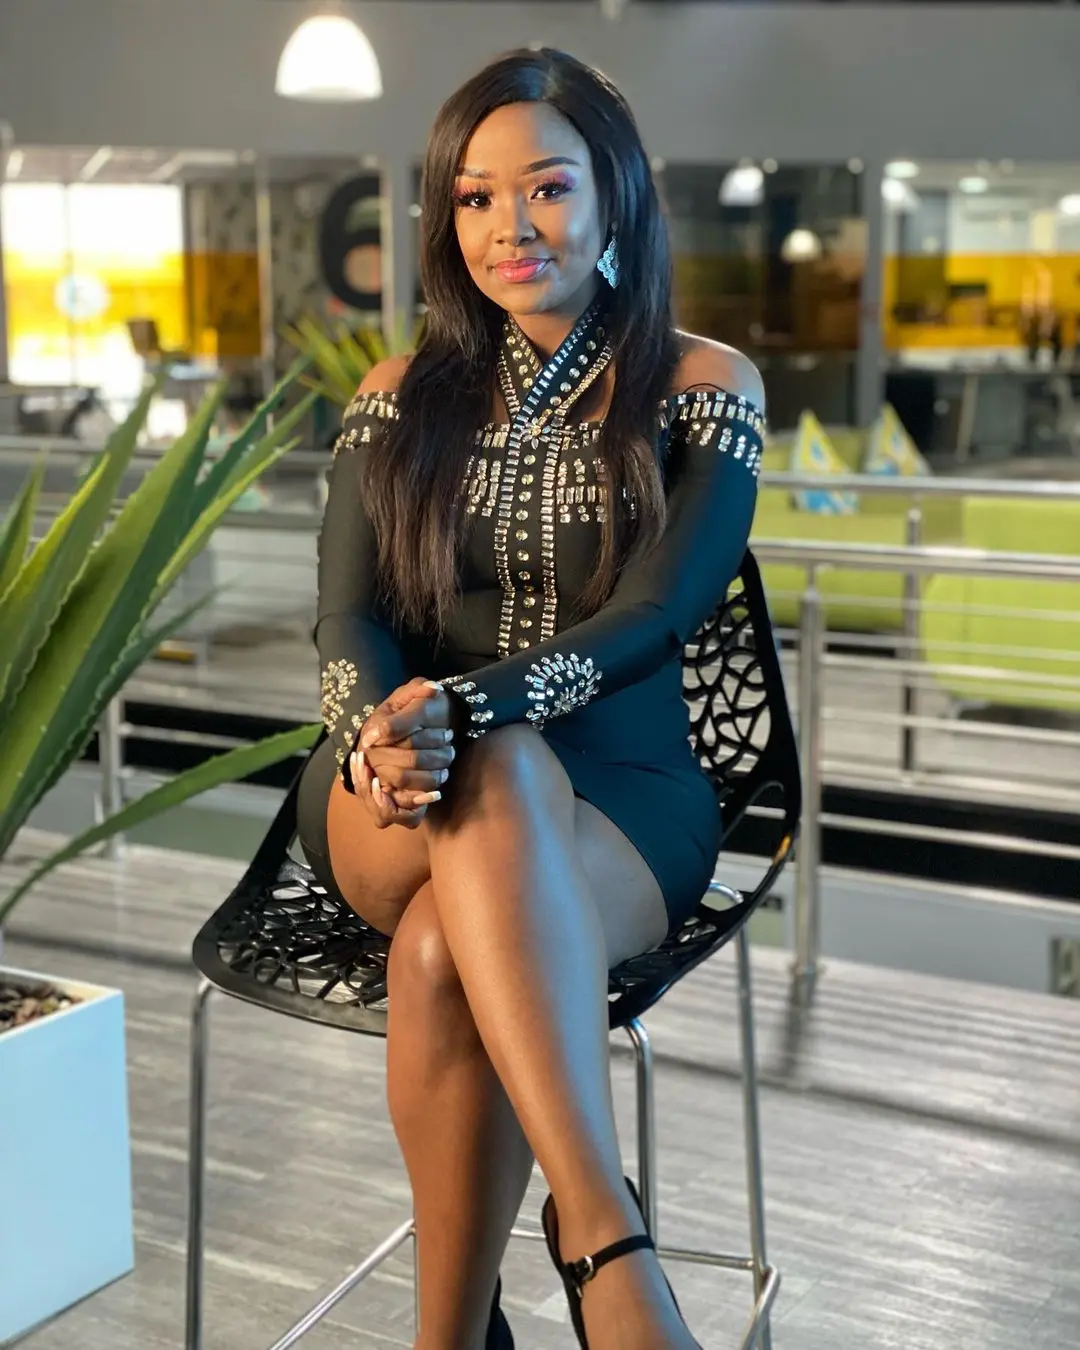 Nonhle Thema – I’m done with chasing men